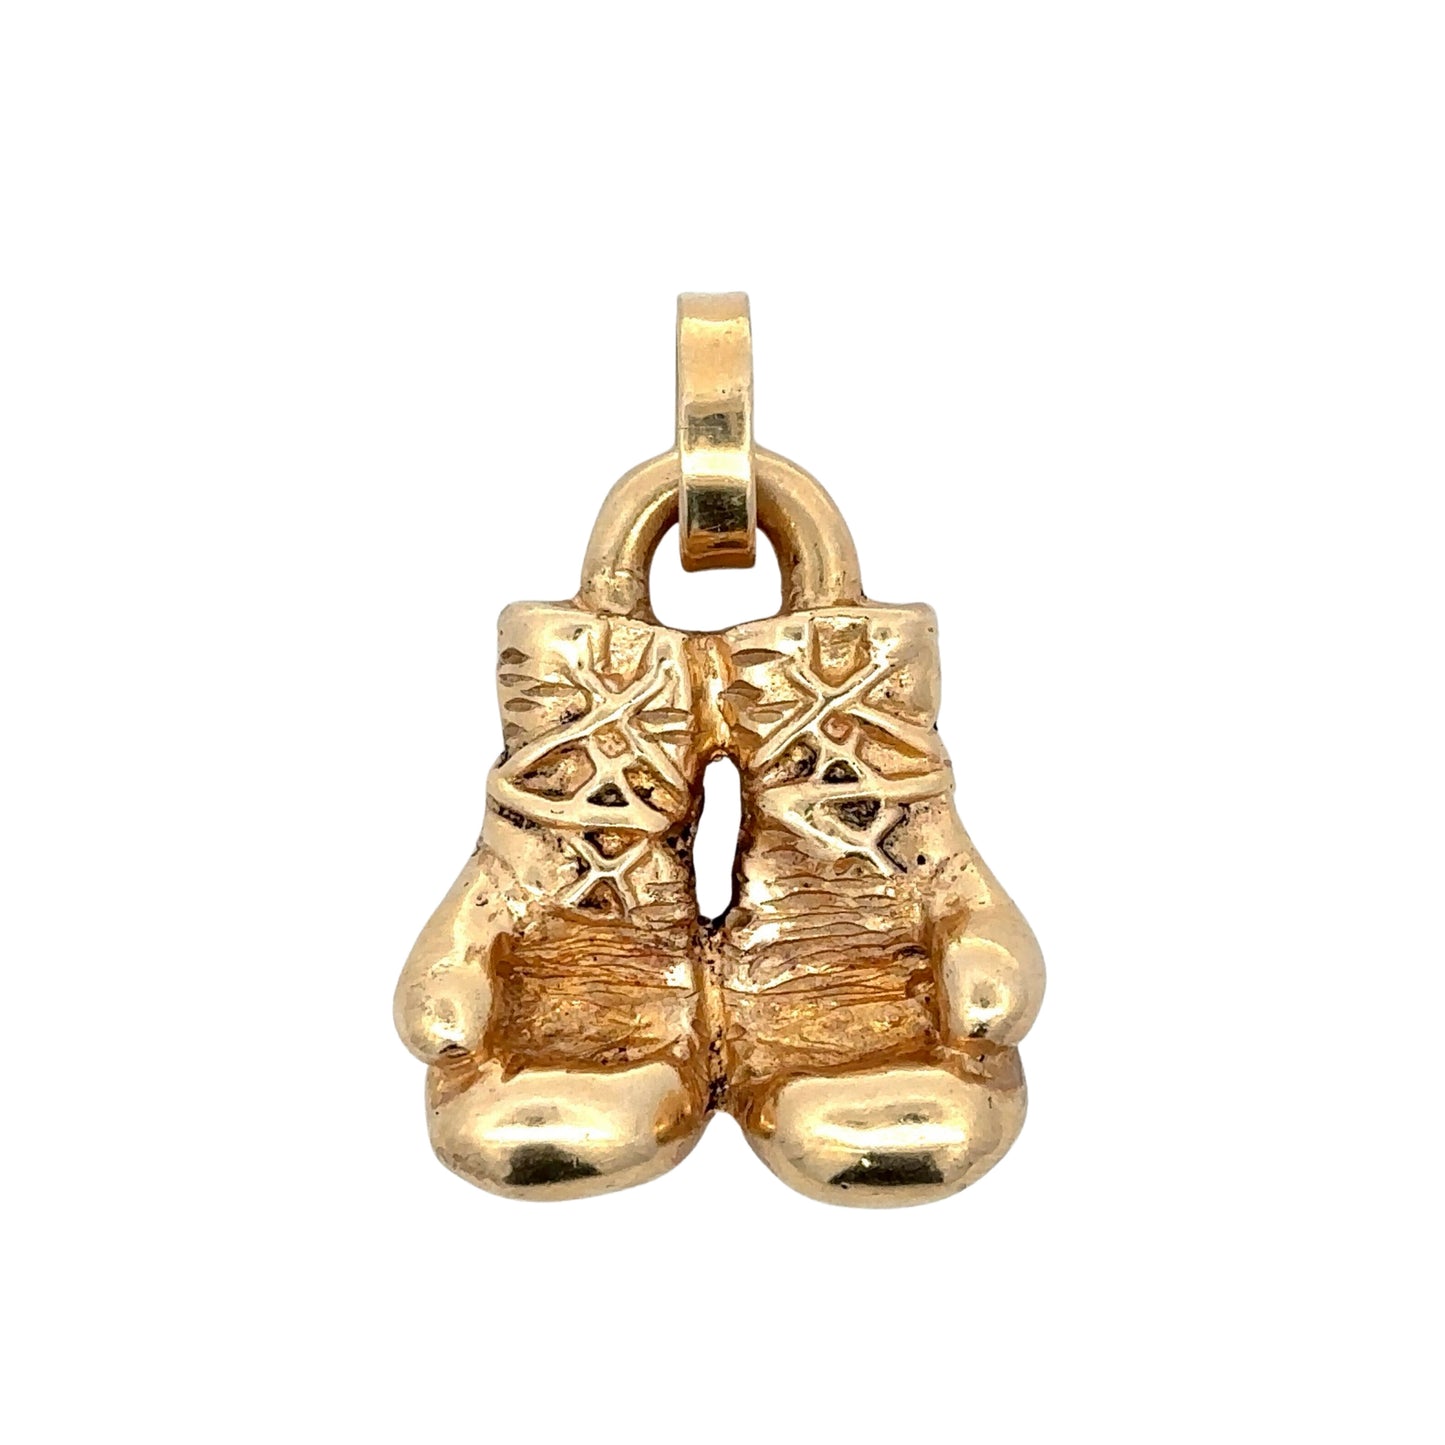 yellow gold boxing pendant with black marks, scratches, + wear to make it look like an antique piece.